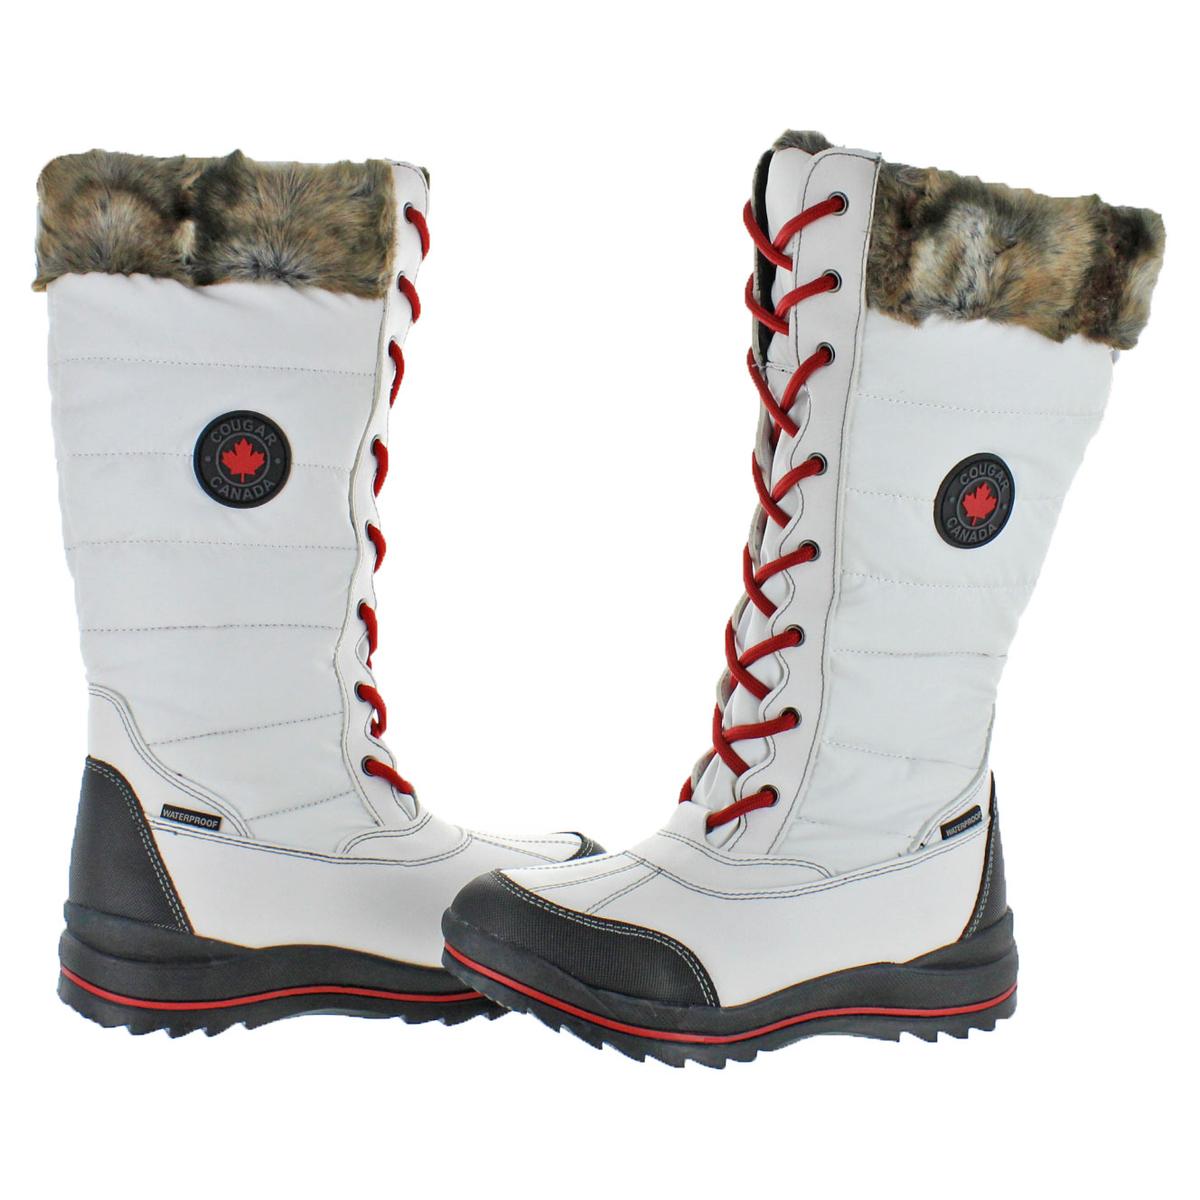 women's snow boots with fur trim